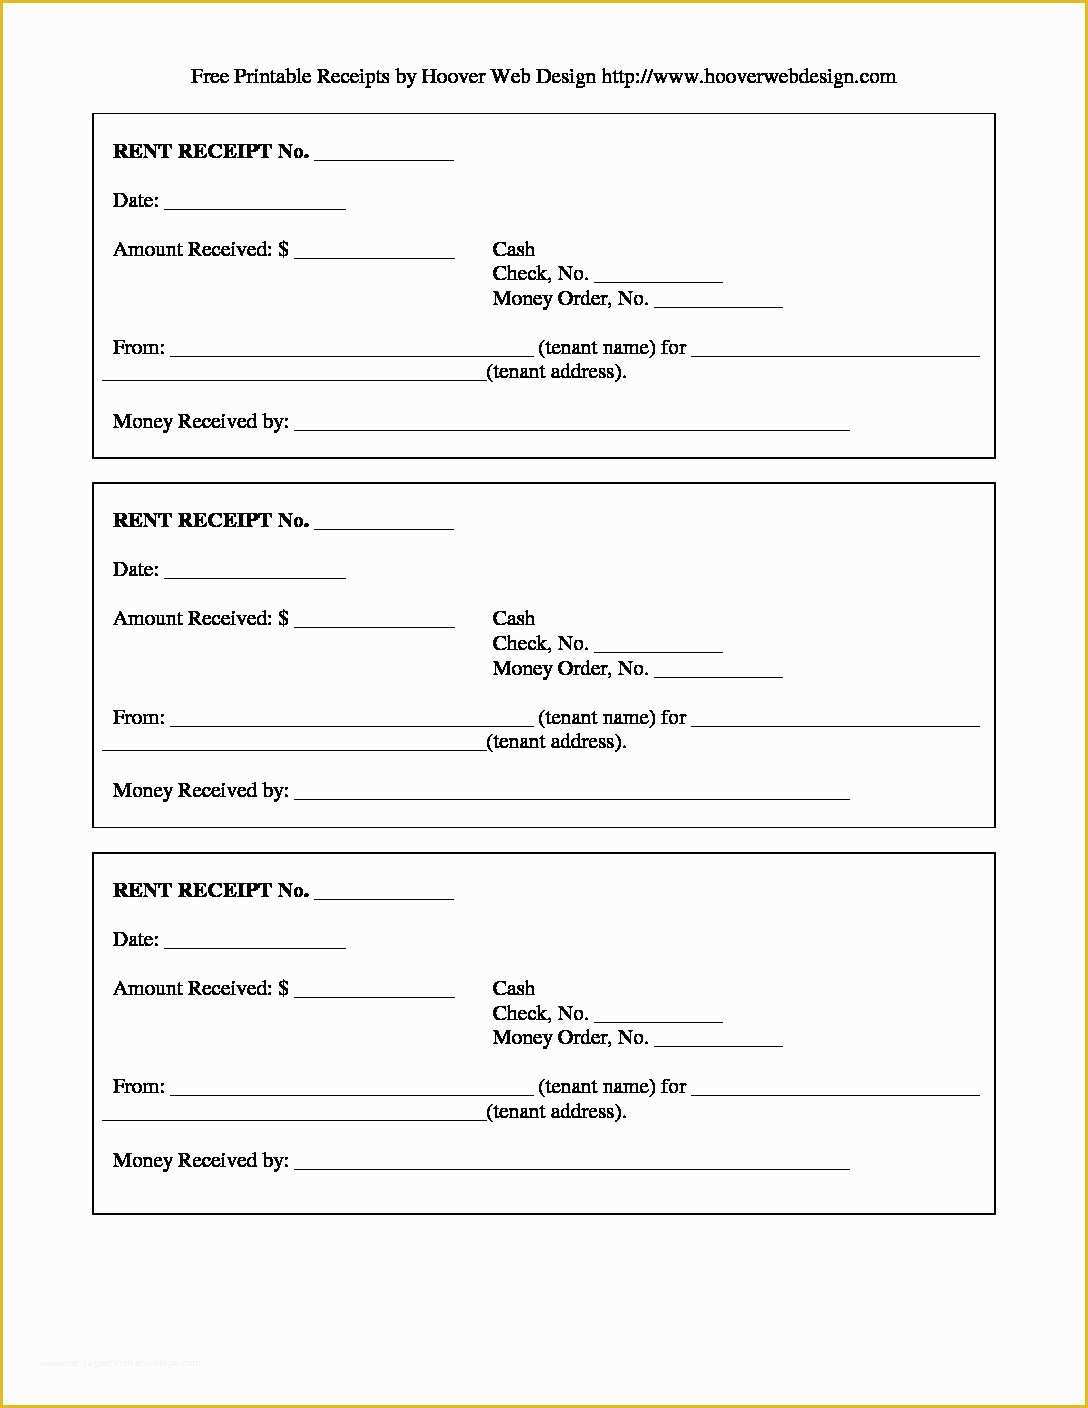 Free Printable Blank Receipt Template Of Free Rent Receipt Template and What Information to Include